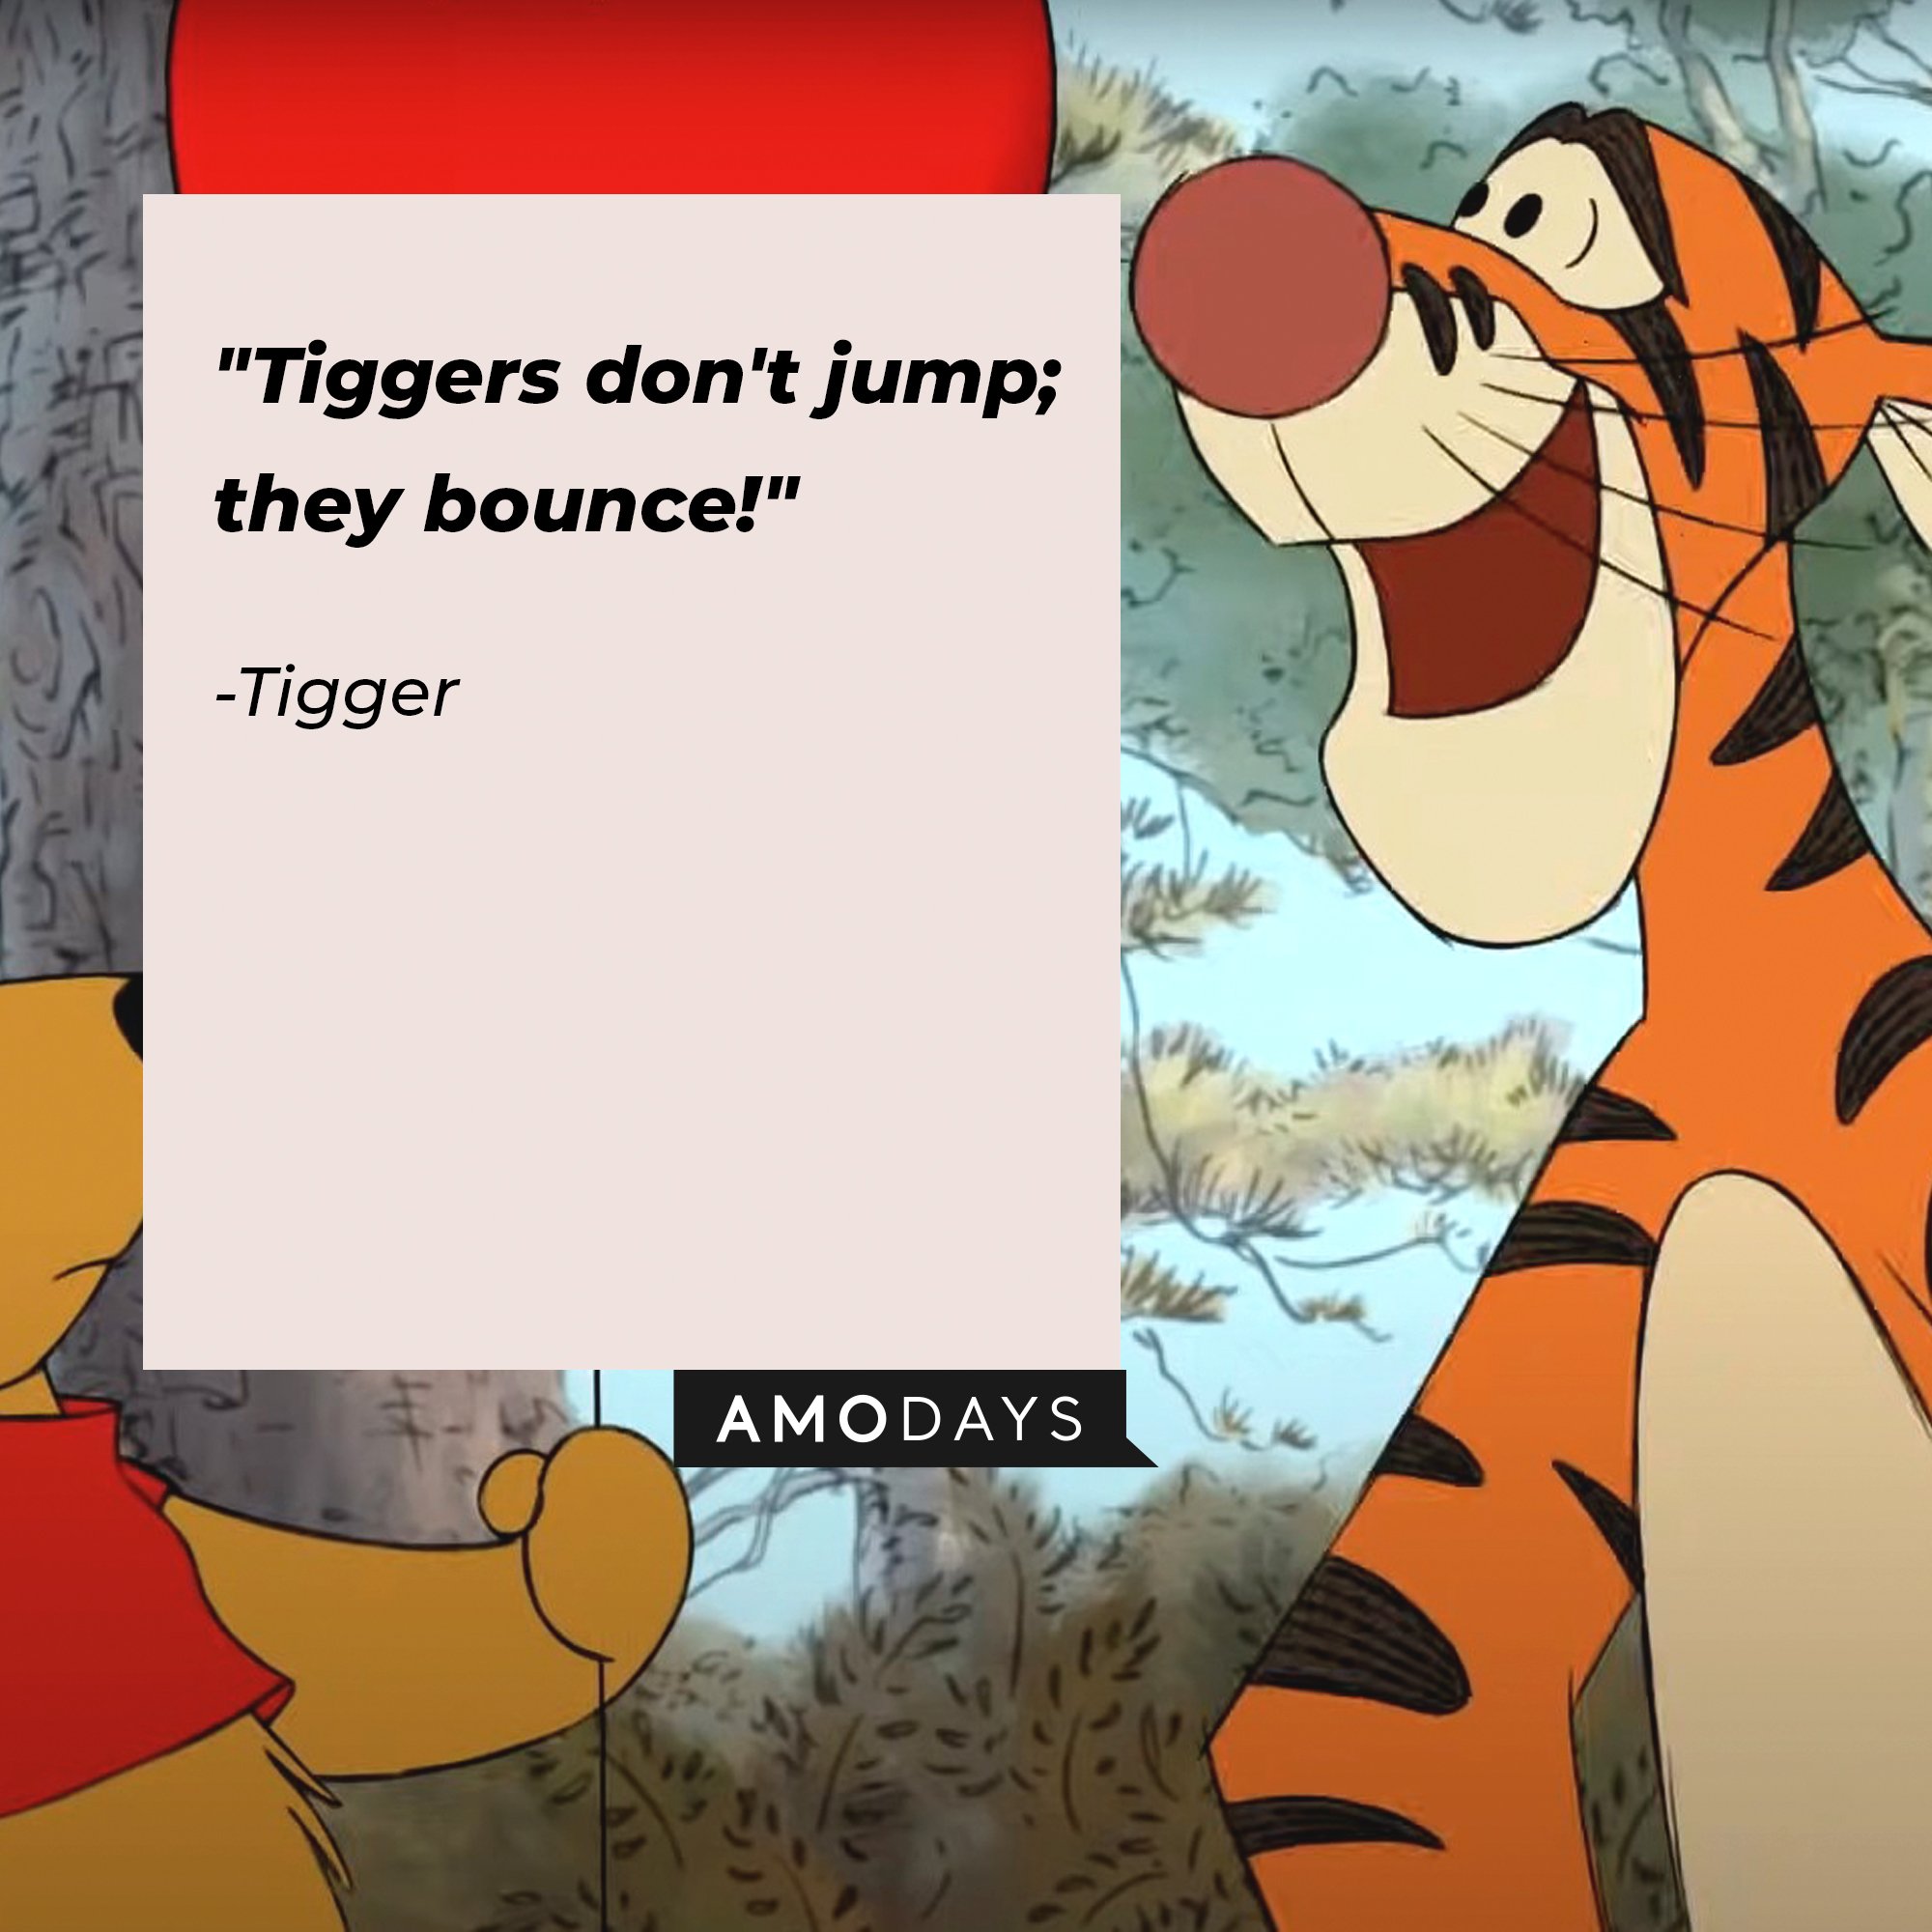 Tigger's quote: "Tiggers don't jump; they bounce!" | Image: AmoDays